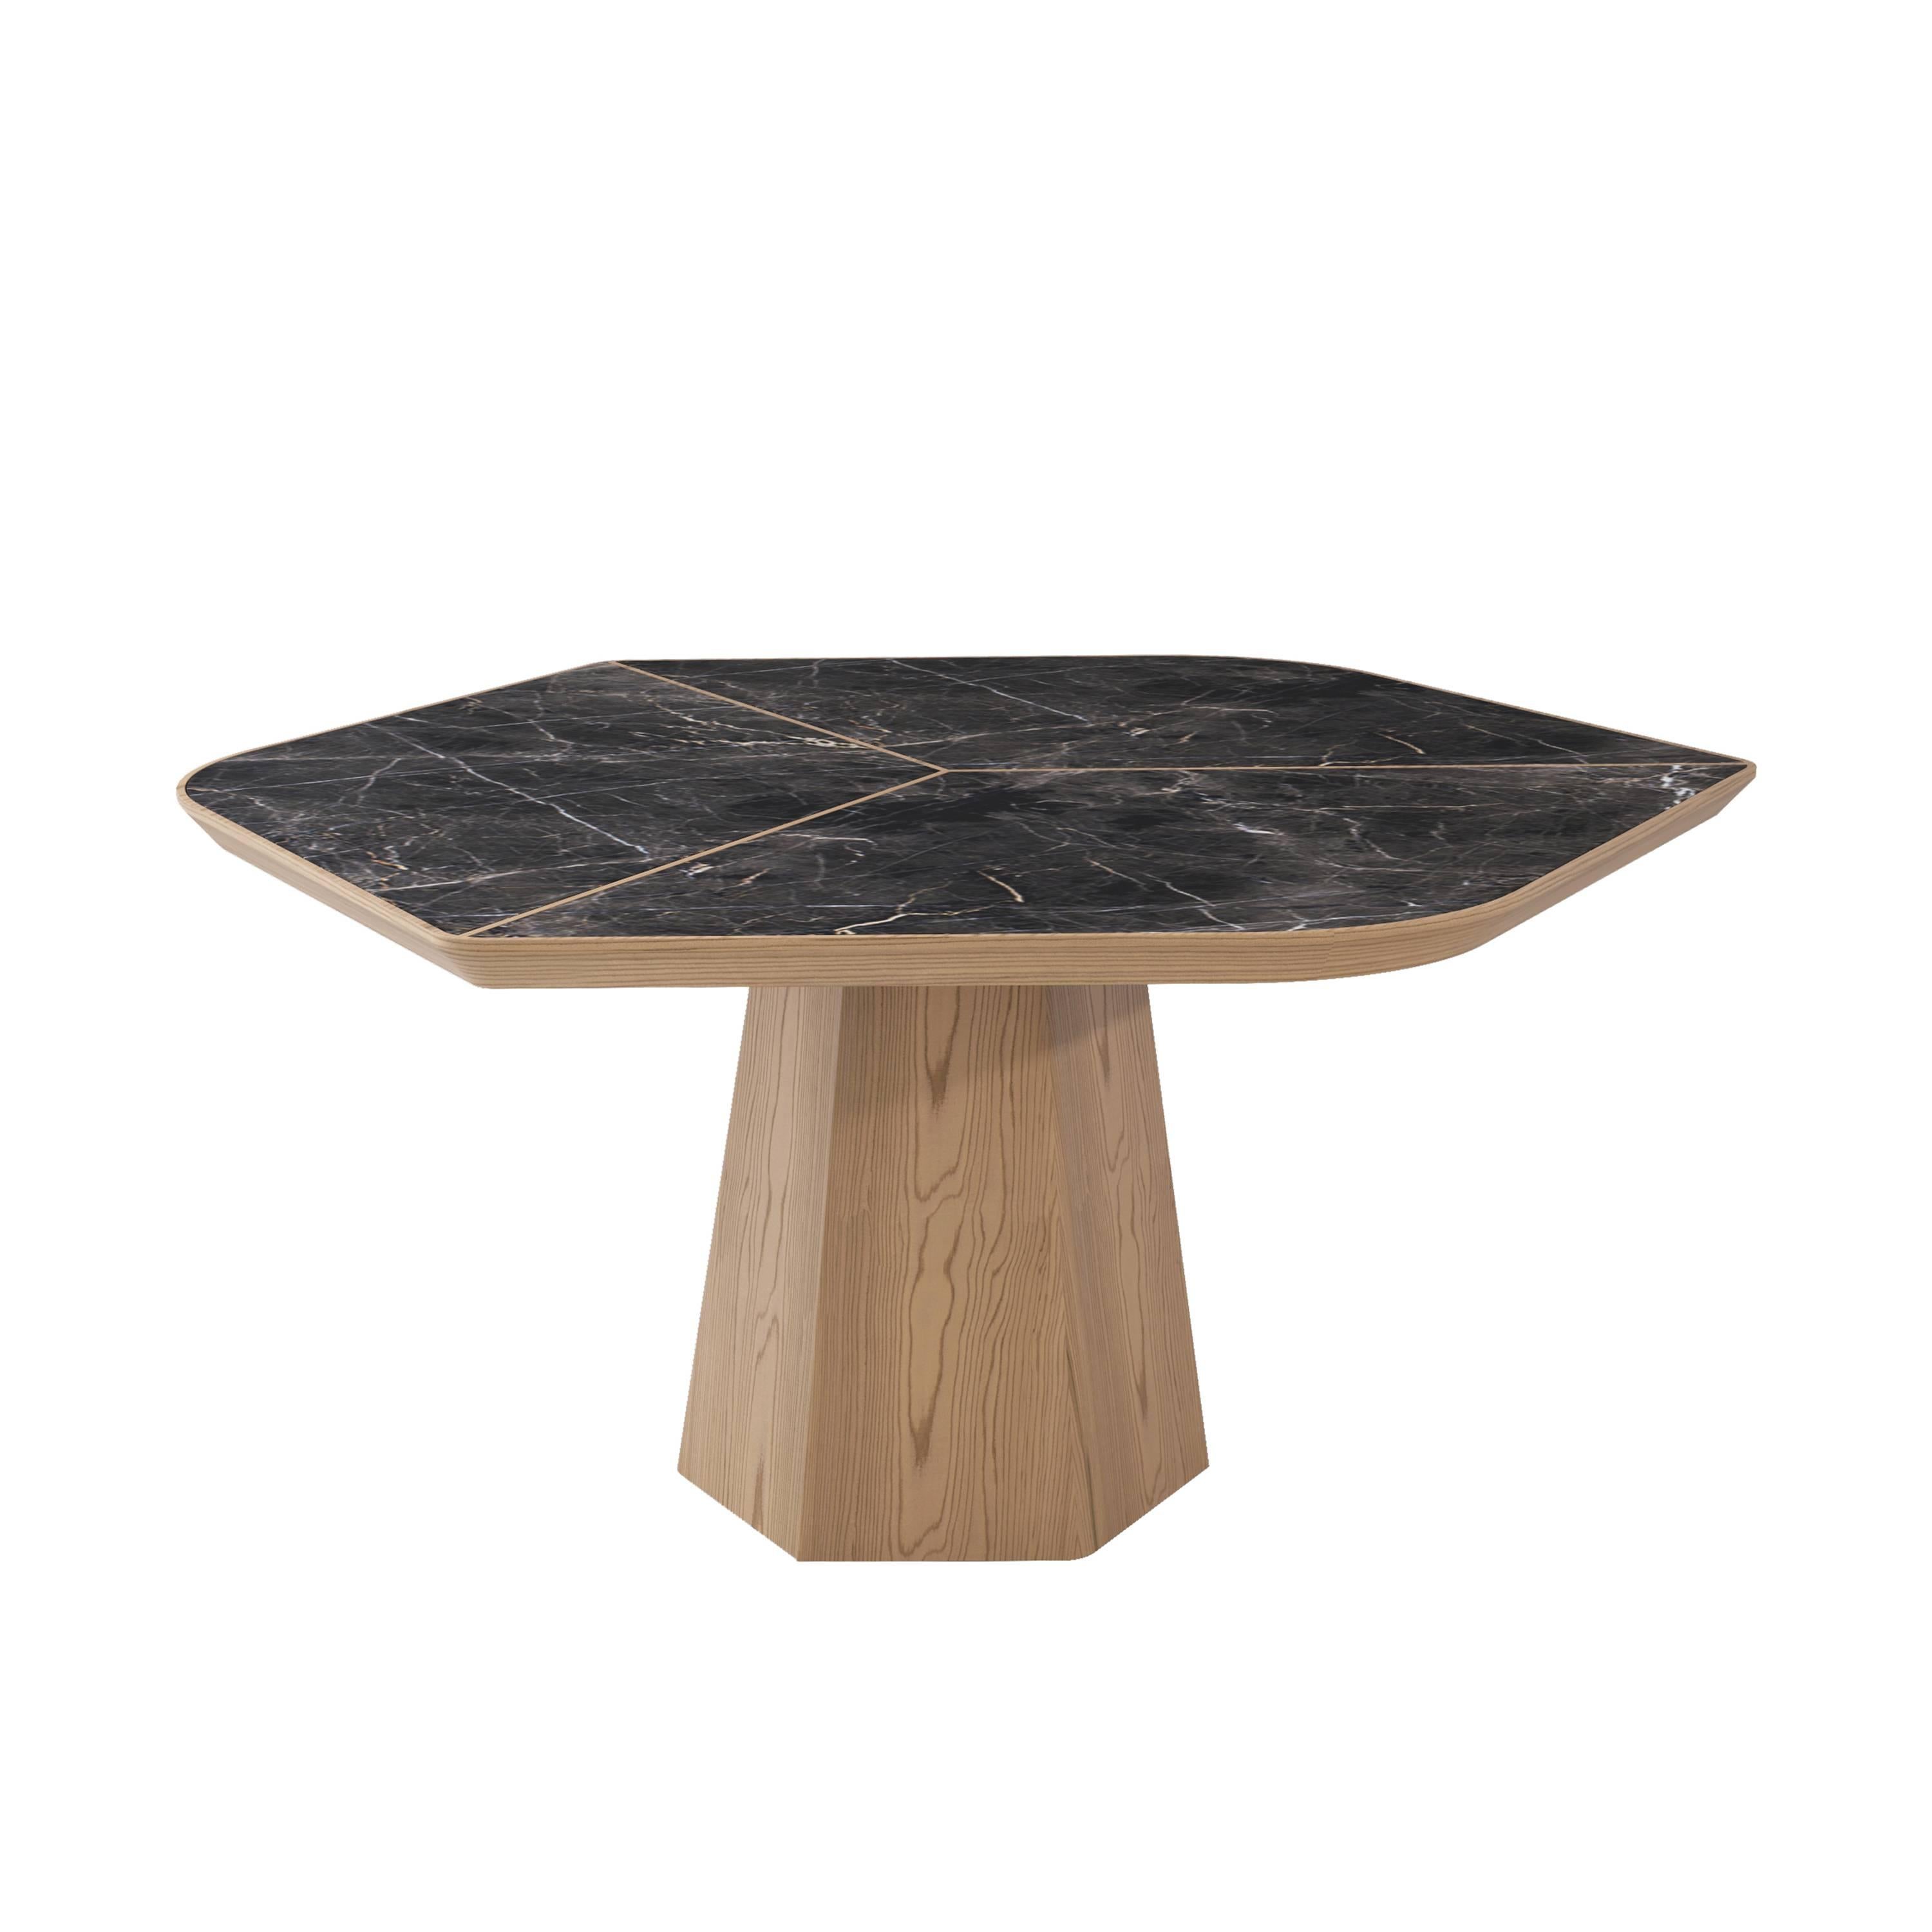 The classic elegance of marble combined with sophisticated details make the Evolve table a genuine piece of sculpture.
 
Evolve dining table has won 'Good Design Award' in Design Turkey.